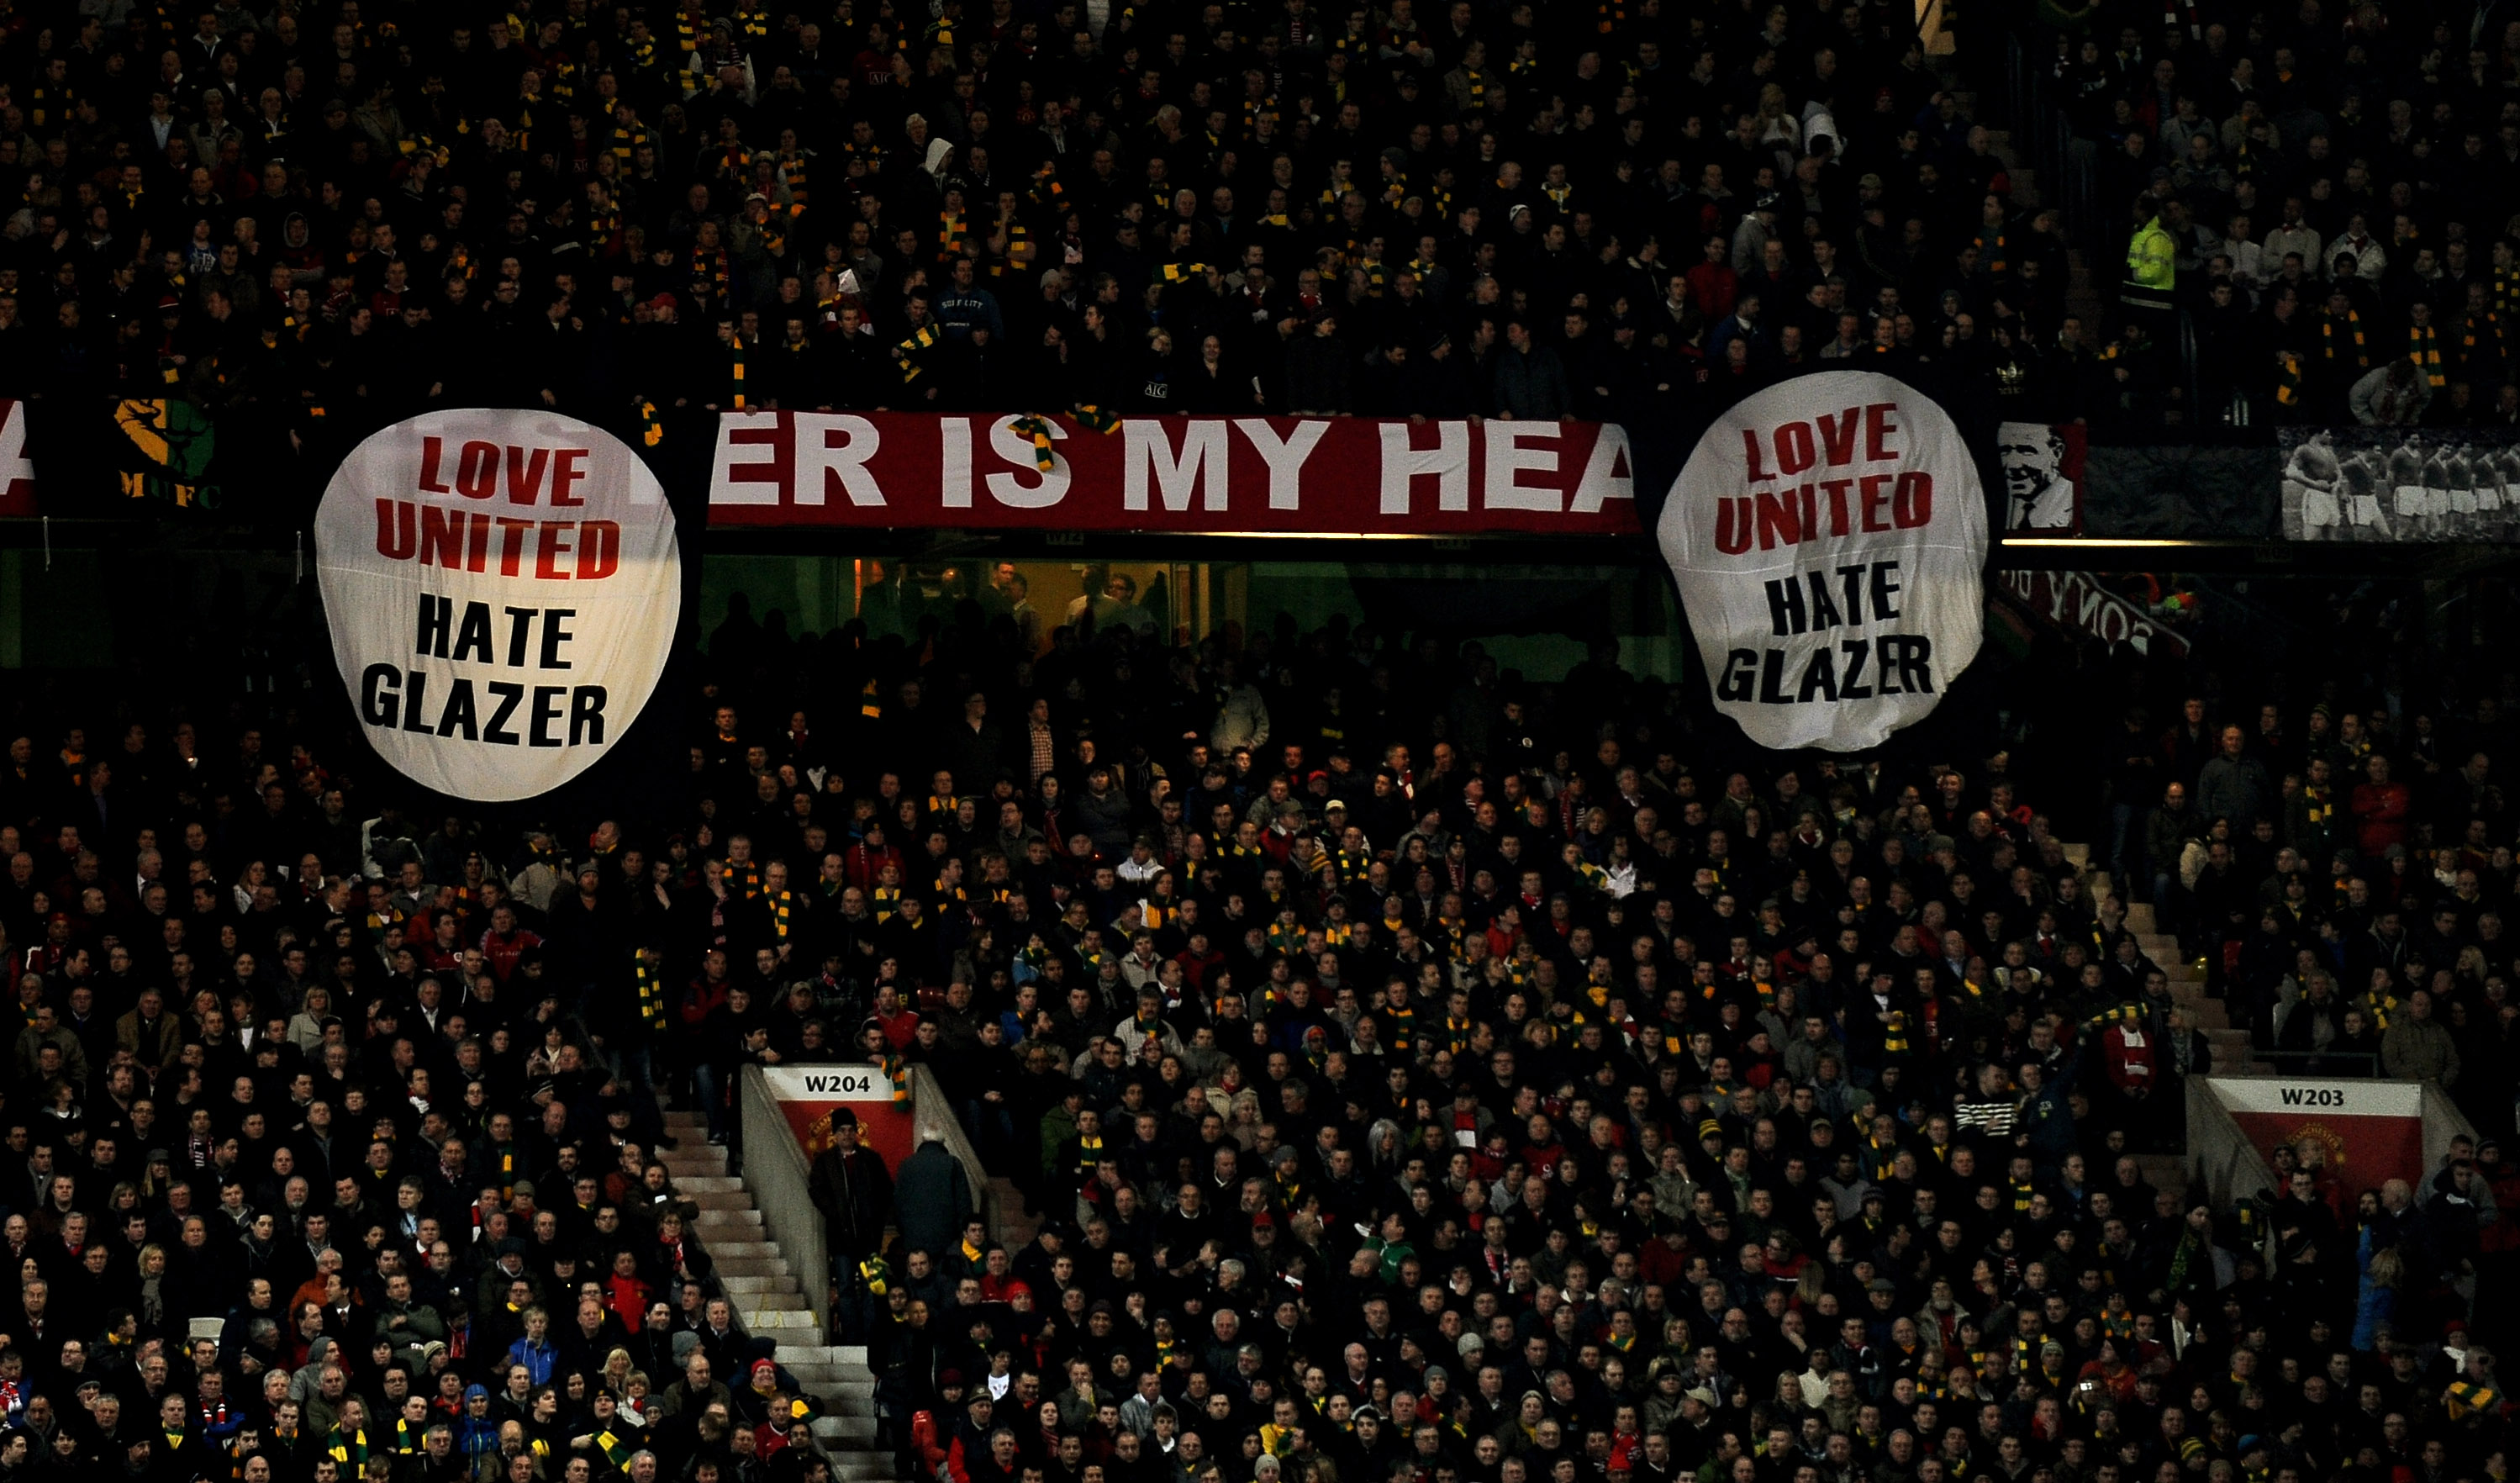 MANCHESTER, ENGLAND - MARCH 10: Manchester United fans reveal anti Glazer banners during the UEFA Champions League First Knockout Round, second leg match between Manchester United and AC Milan at Old Trafford on March 10, 2010 in Manchester, England. (Pho